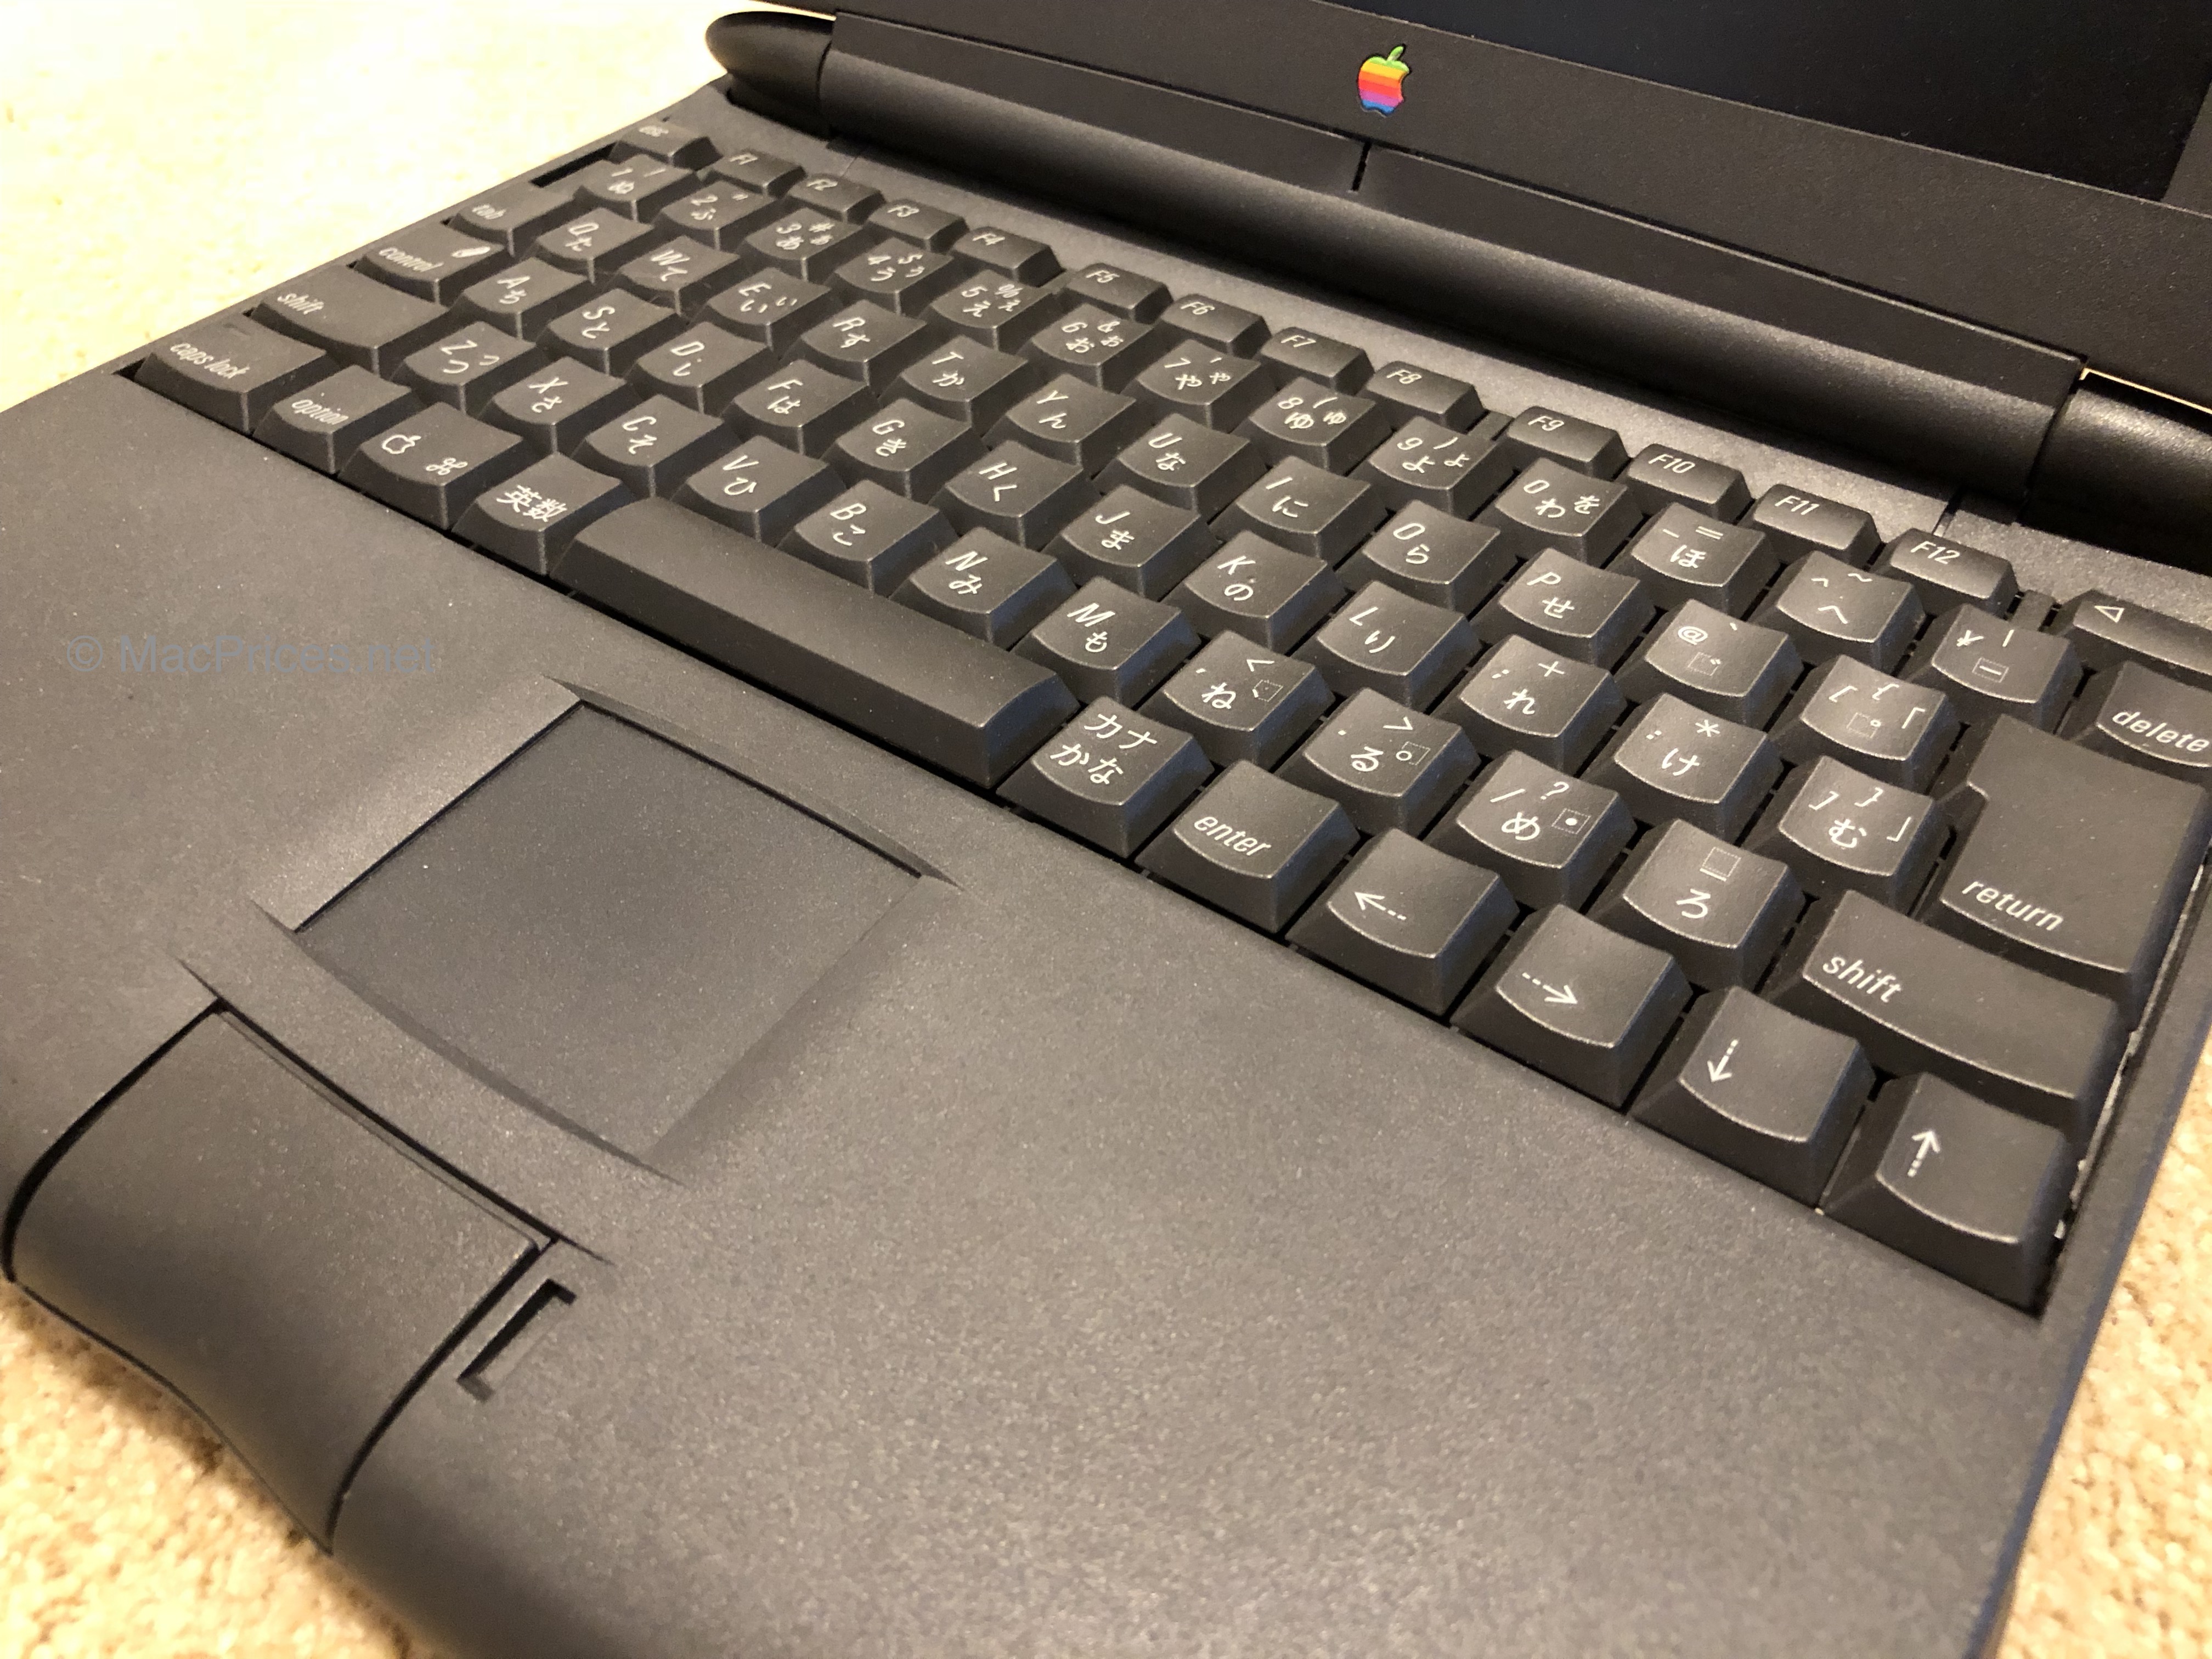 Rare Macs: The PowerBook 550c. Description, specifications, and 